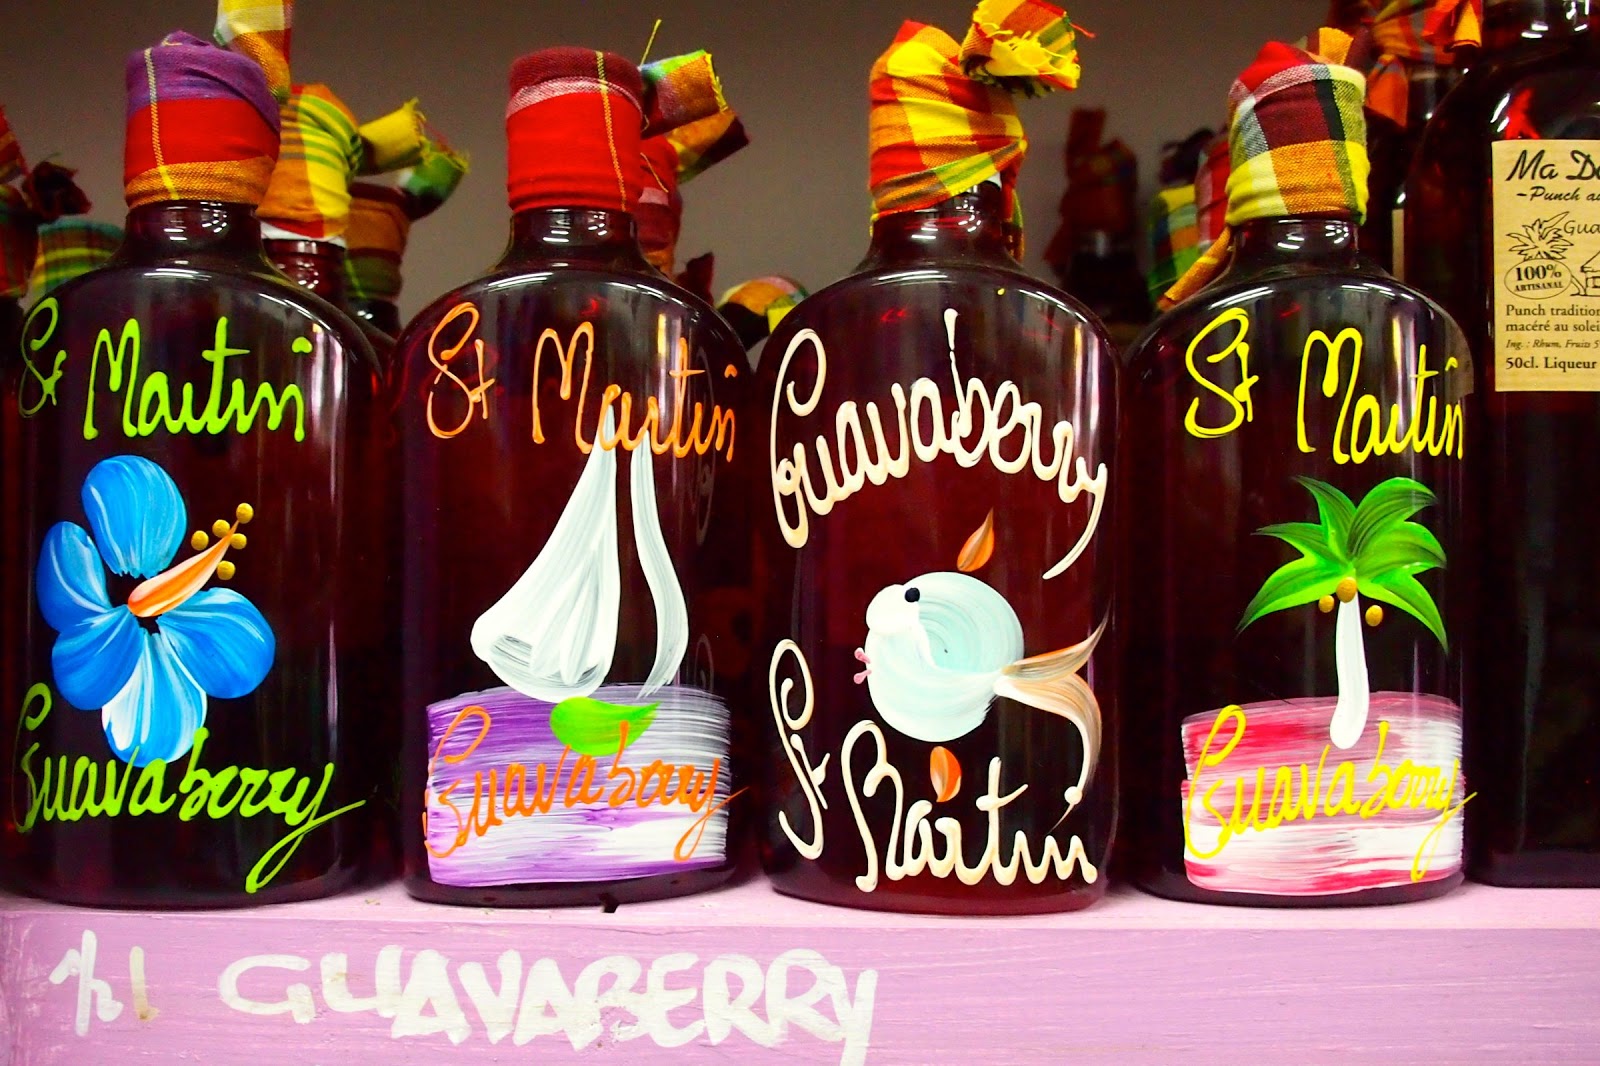 Travel 2 the Caribbean Blog: Celebrate the Holidays with Guavaberry